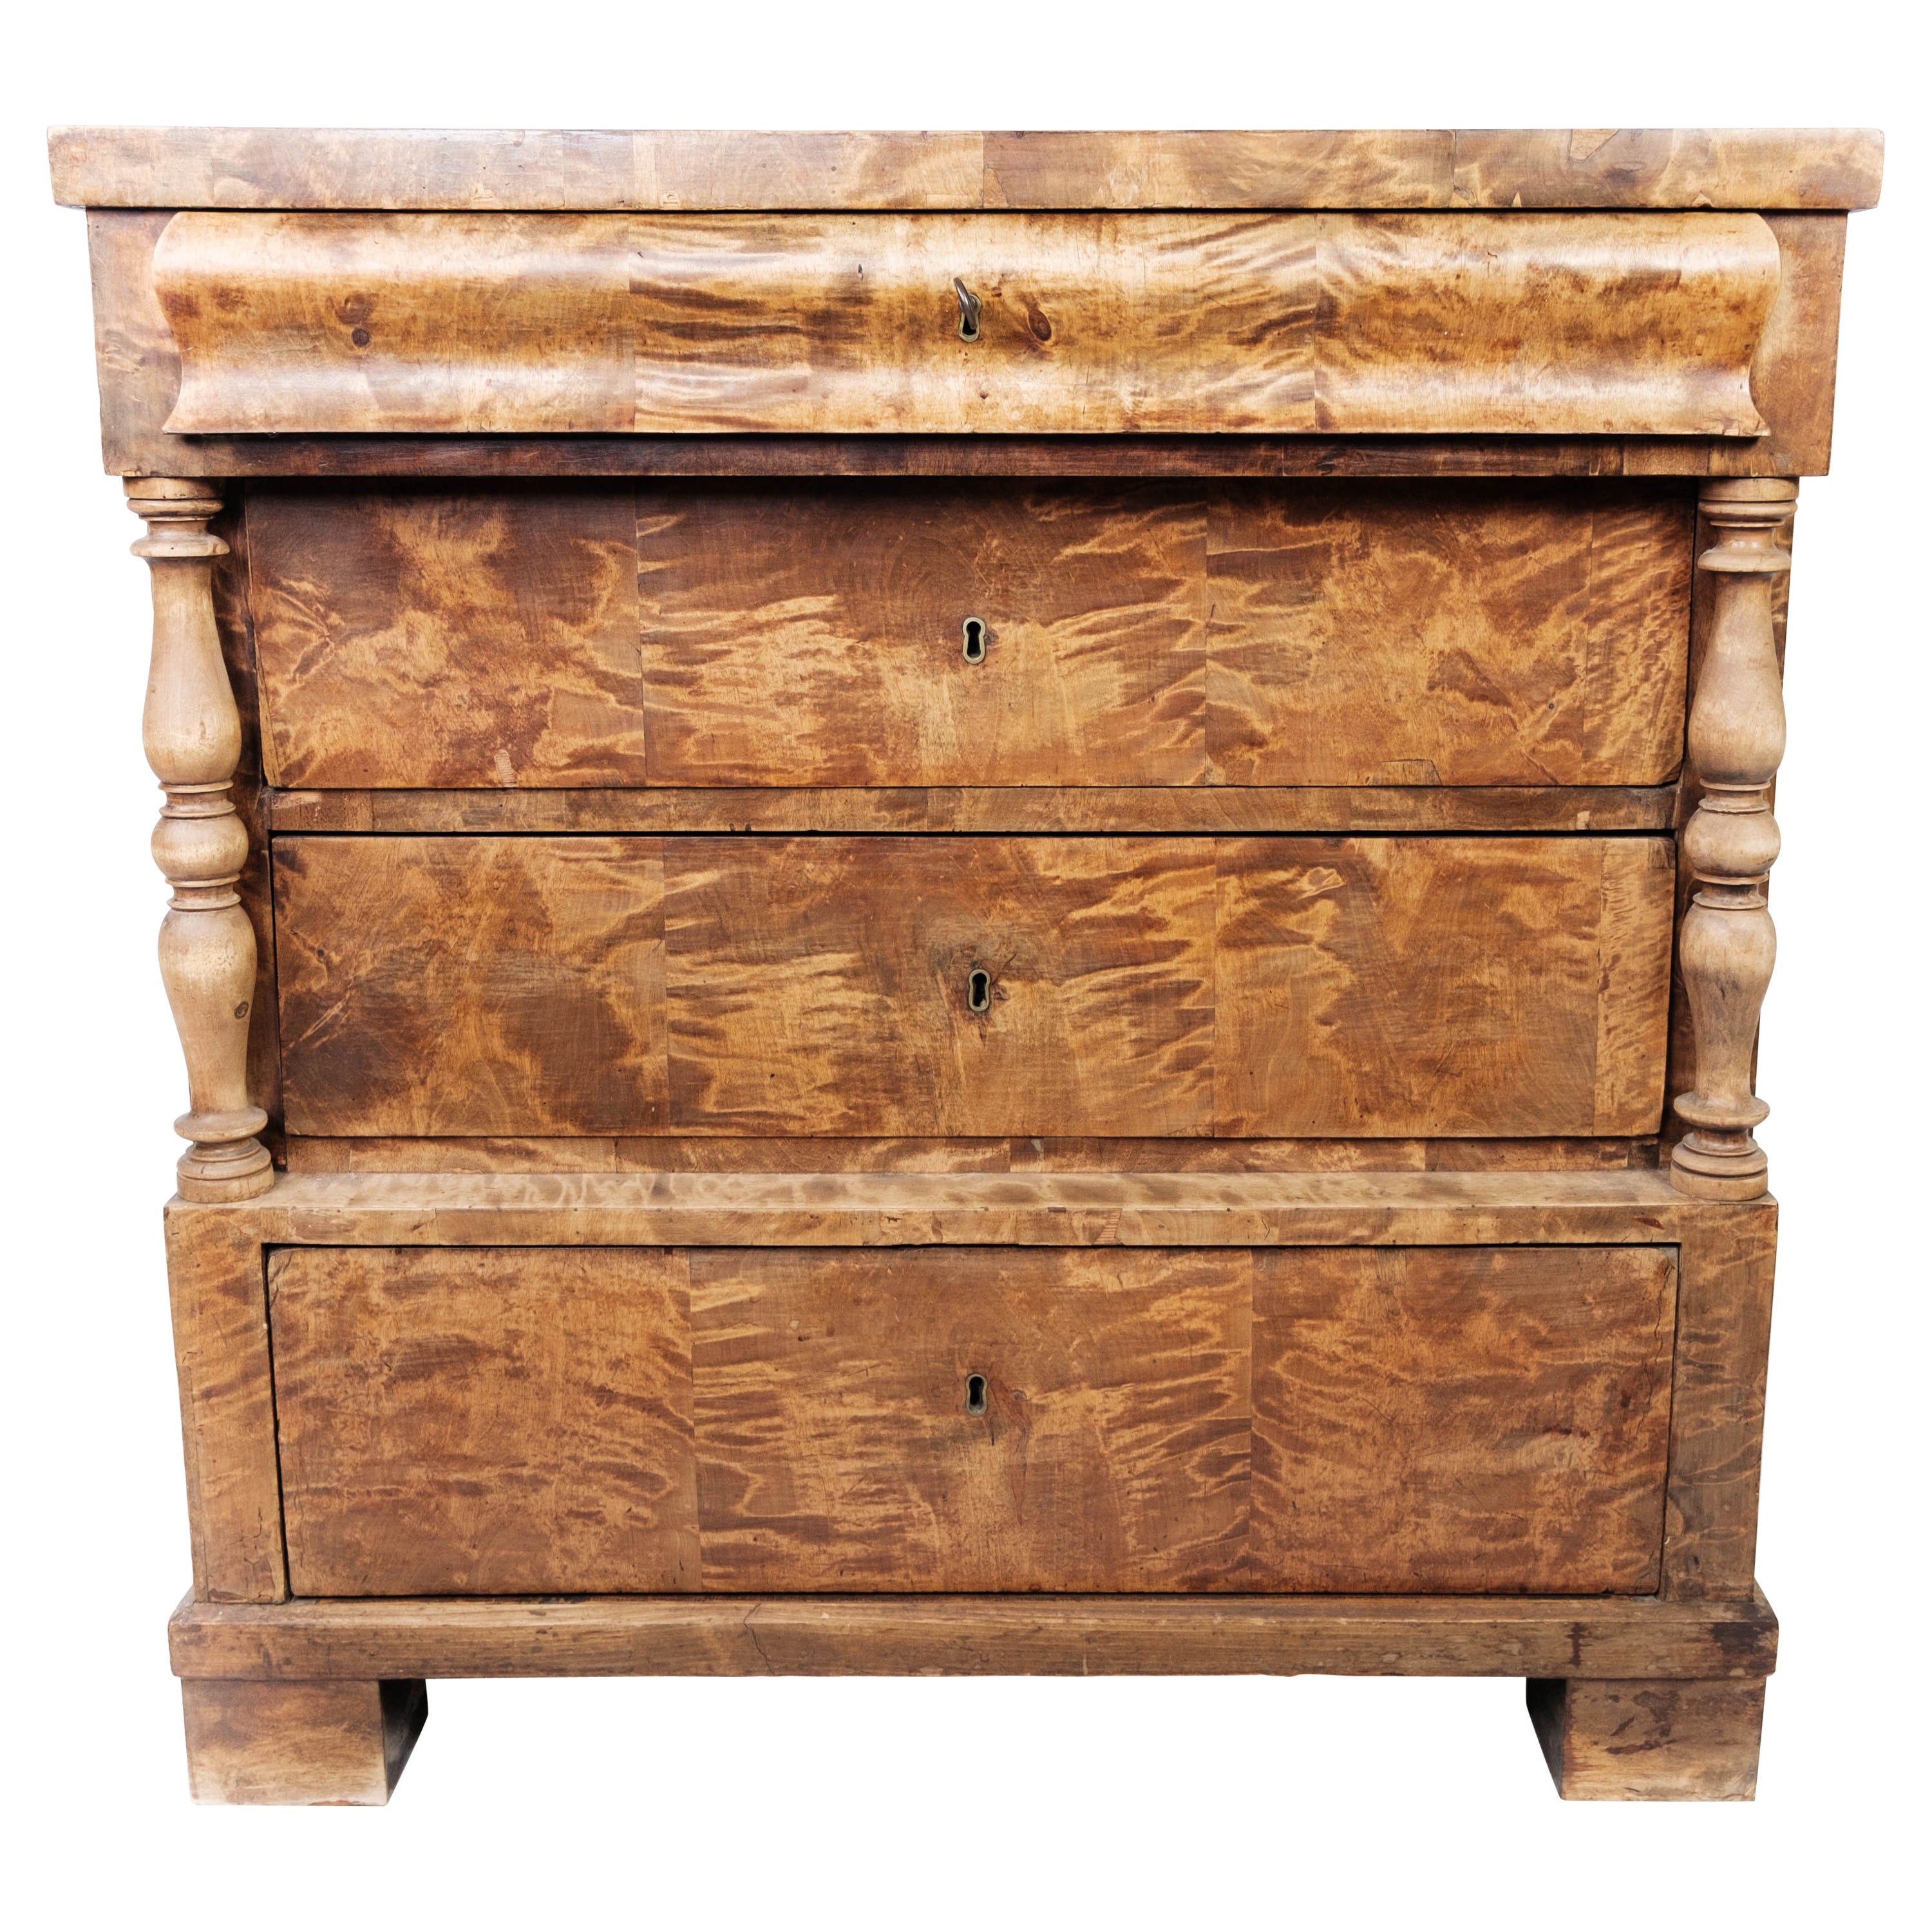 Late Empire Chest of Drawers of Birch Wood from around the 1840s